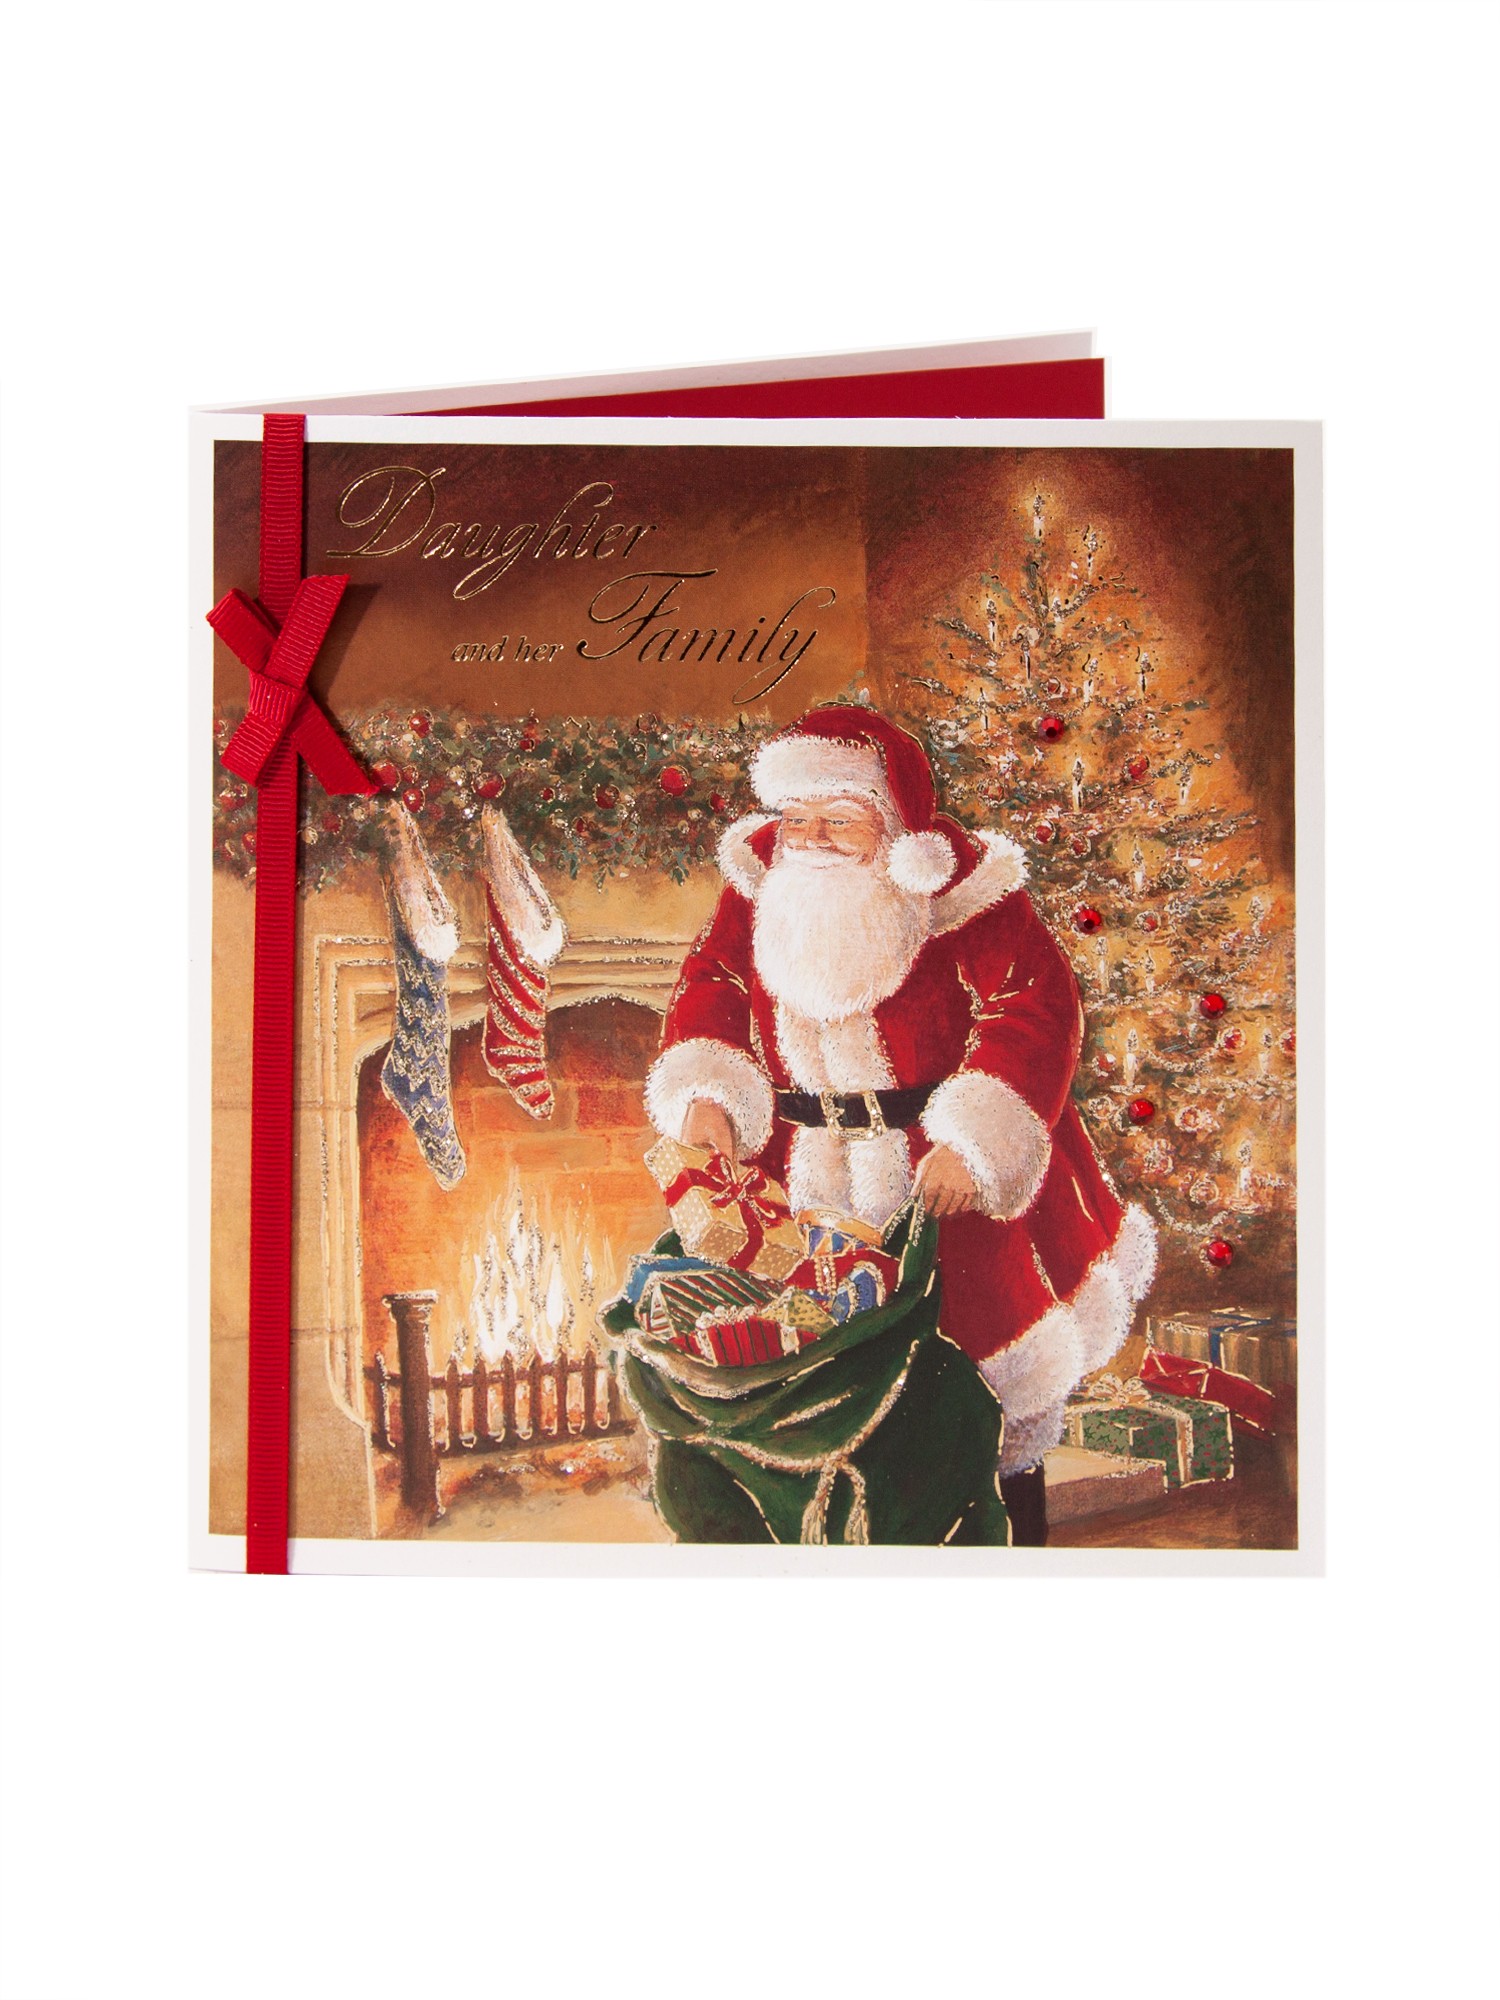 PHOTO: Sparkling Santa Clause Christmas Card - For Daughter & Family